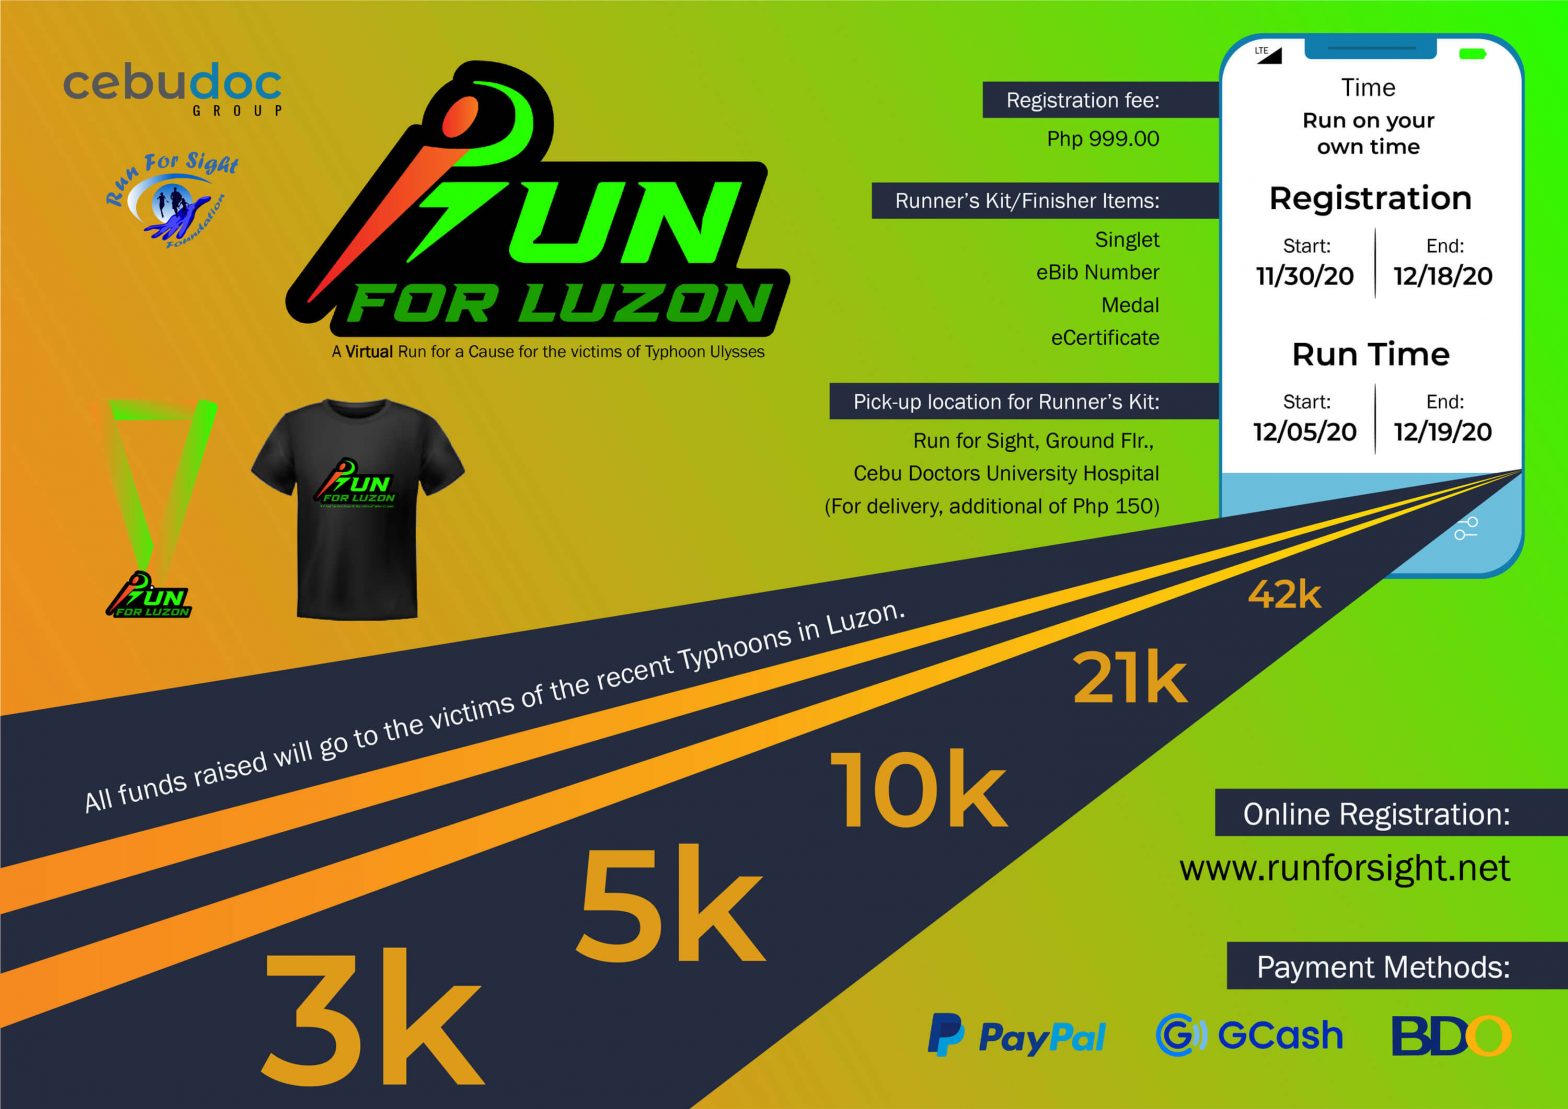 Run for Sight organizes virtual run to raise funds for typhoon victims